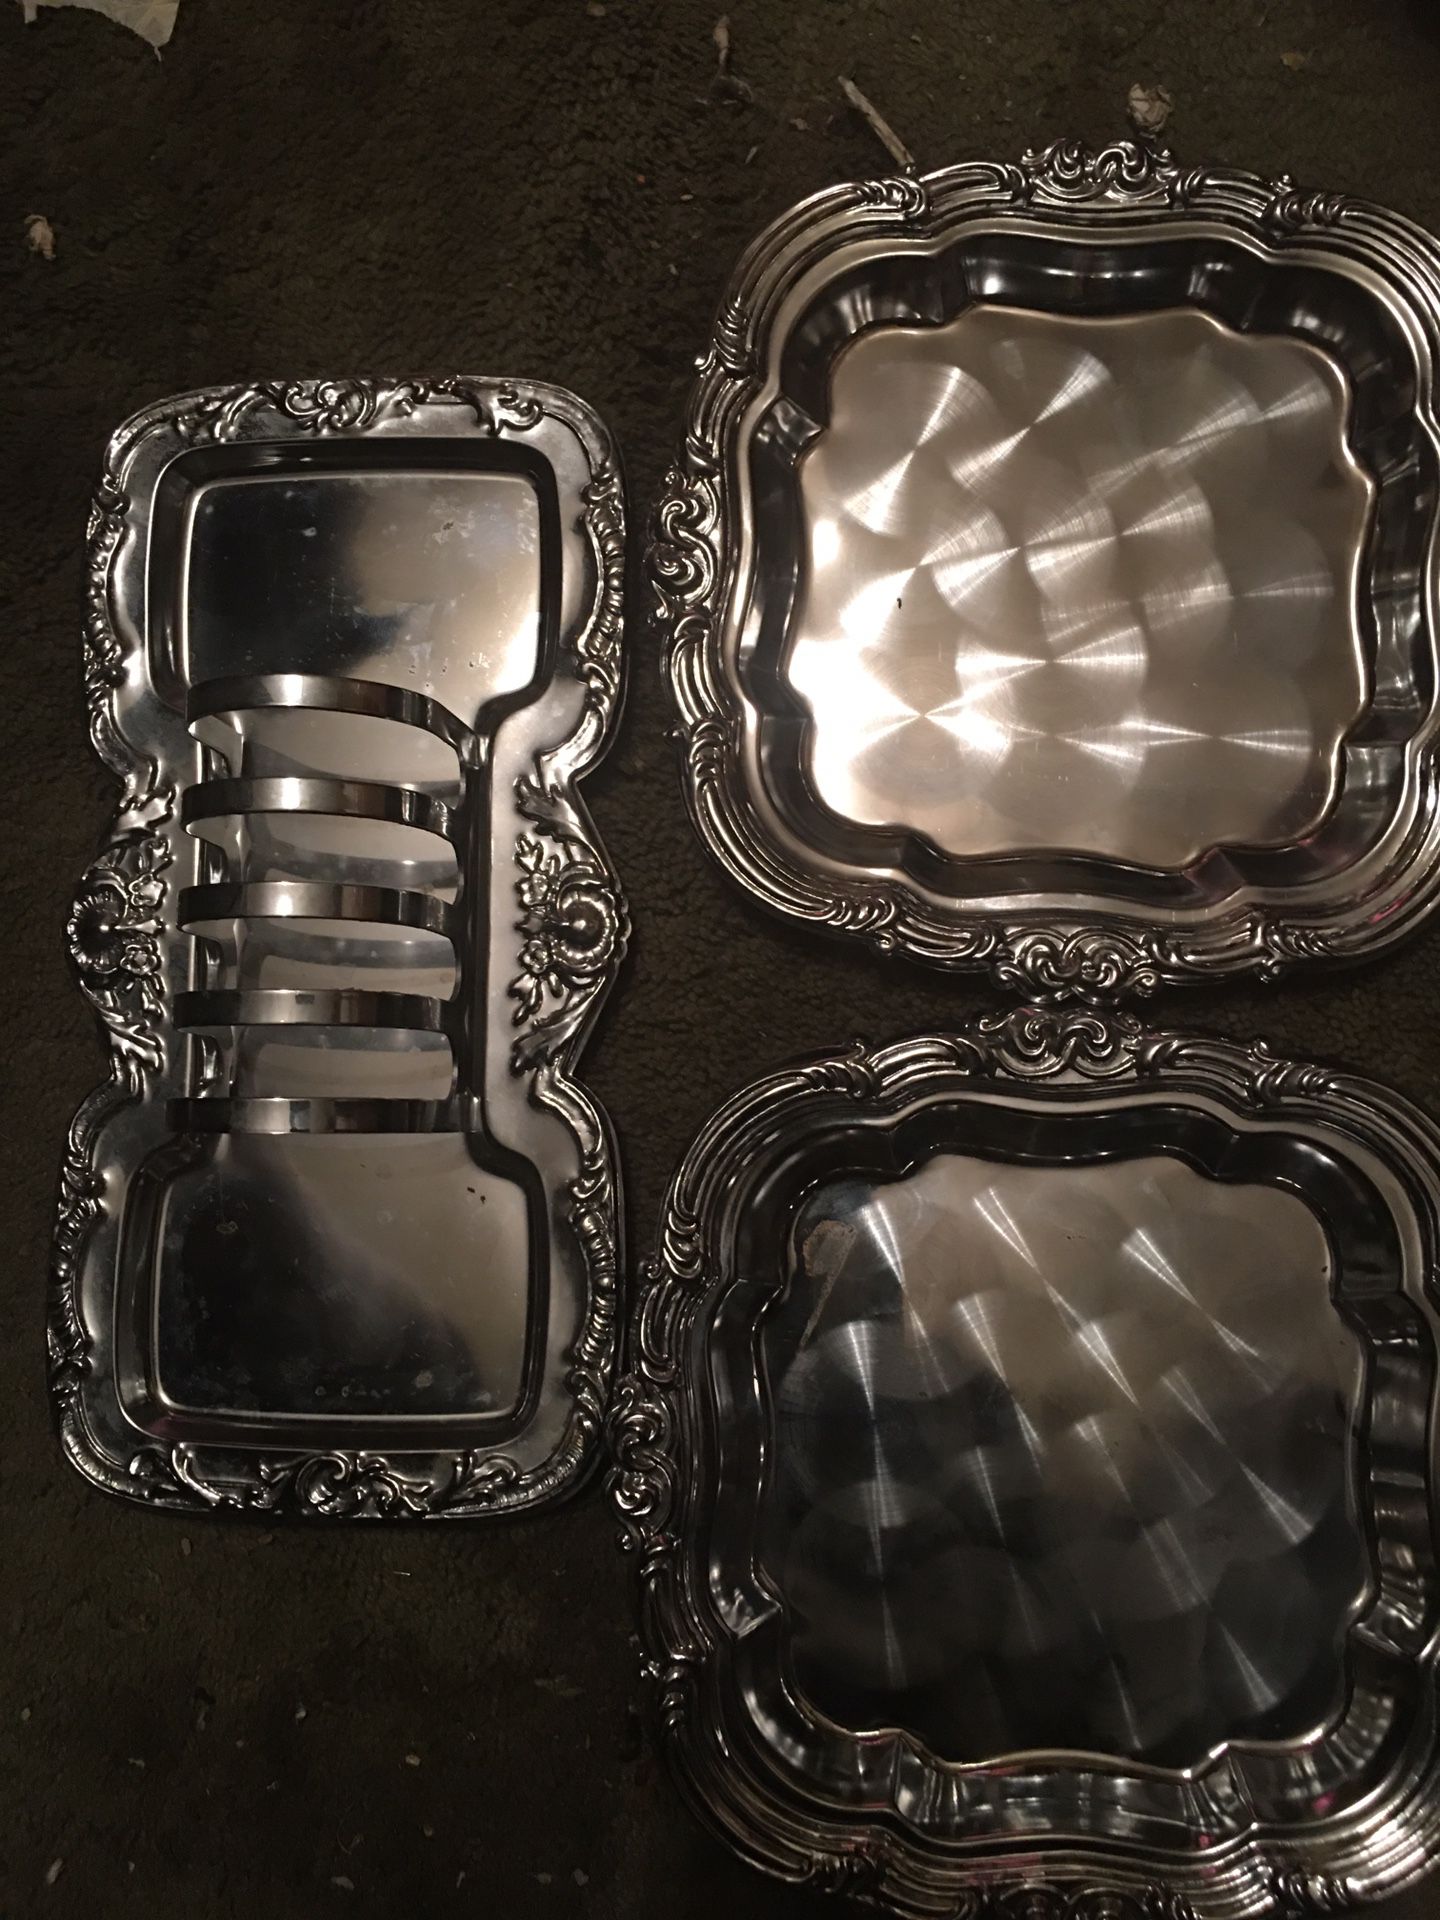 BRAND NEW SILVER PLATED BREAD DISH AND PLATE HOLDER $20.00